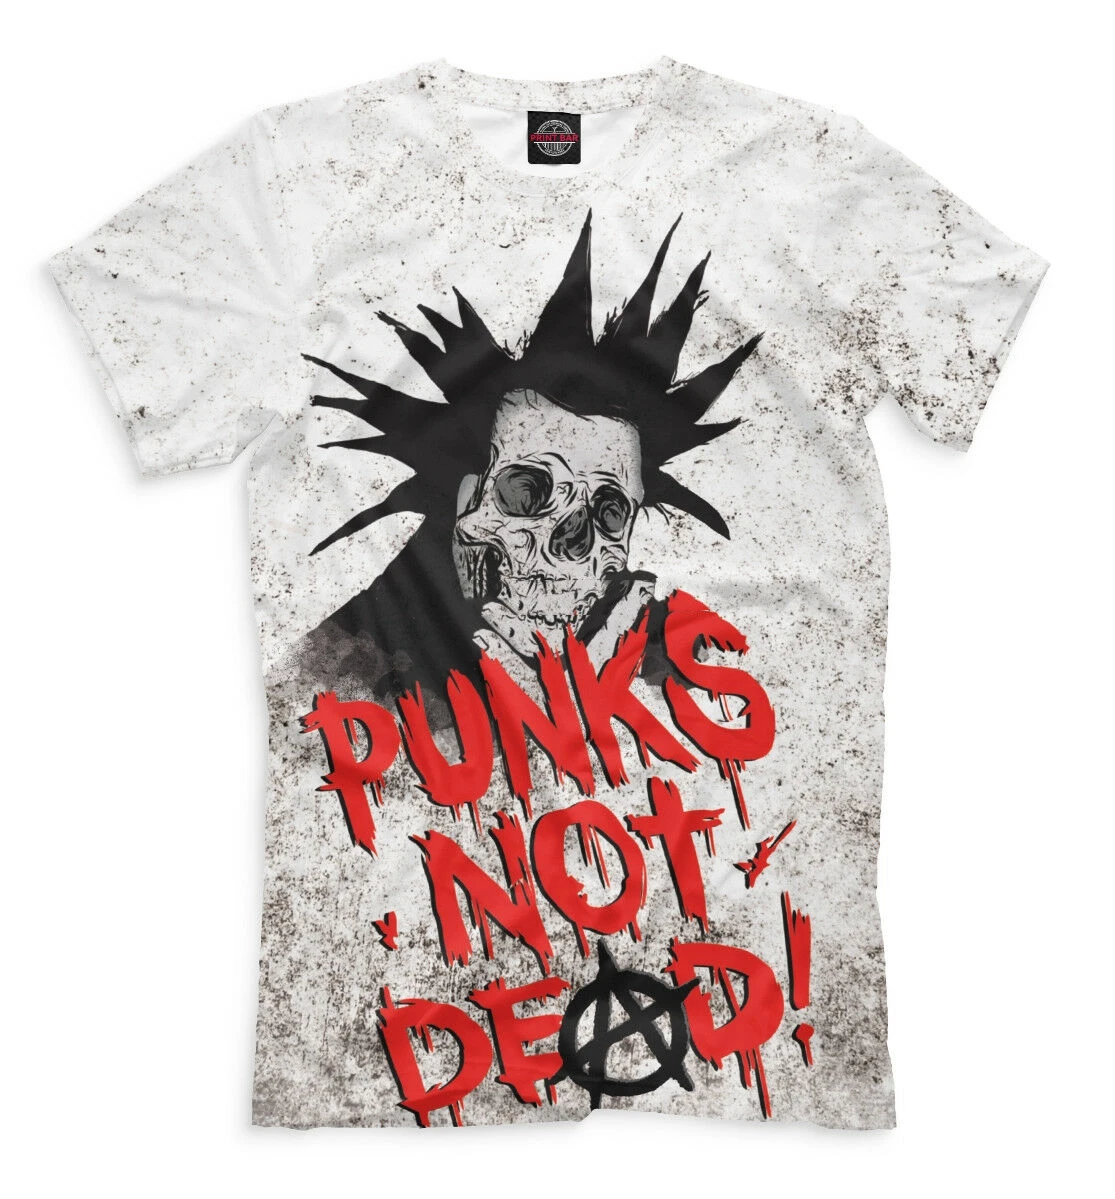 

Punks Not Dead Король И Шут New T-Shirt Music Russia King And Clown 529454